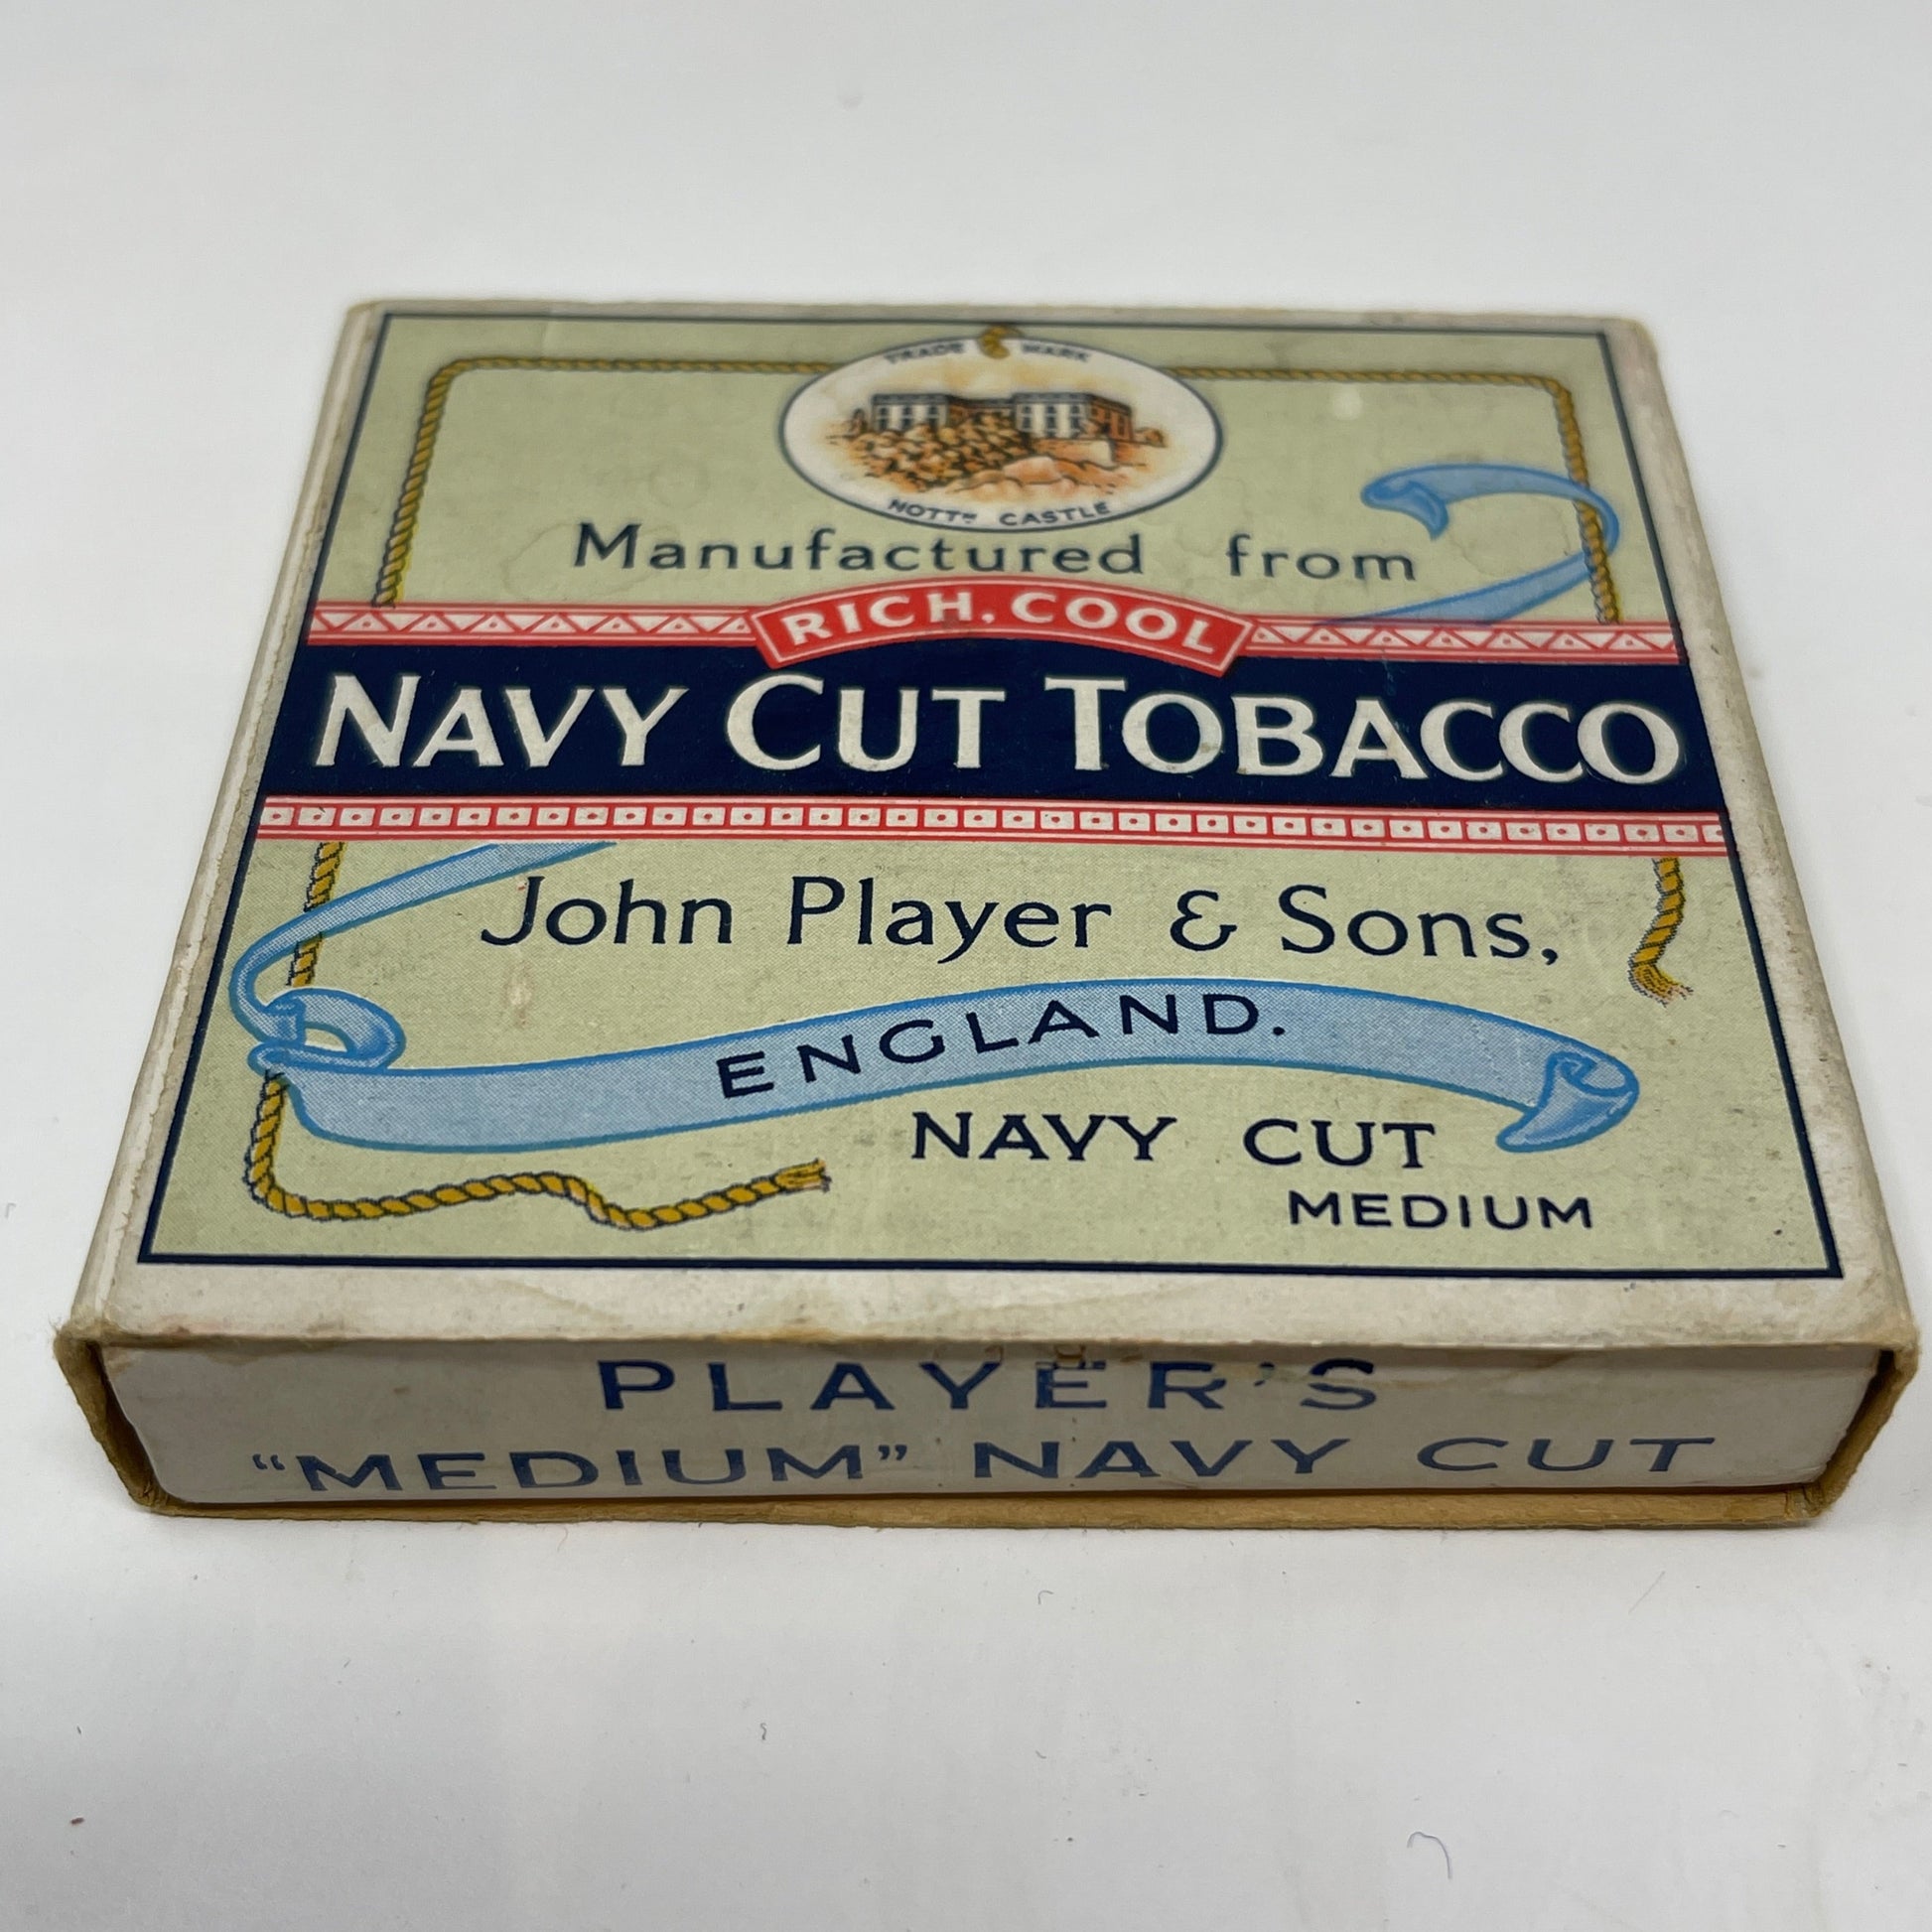 A Packet of Navy Cut Cigarettes